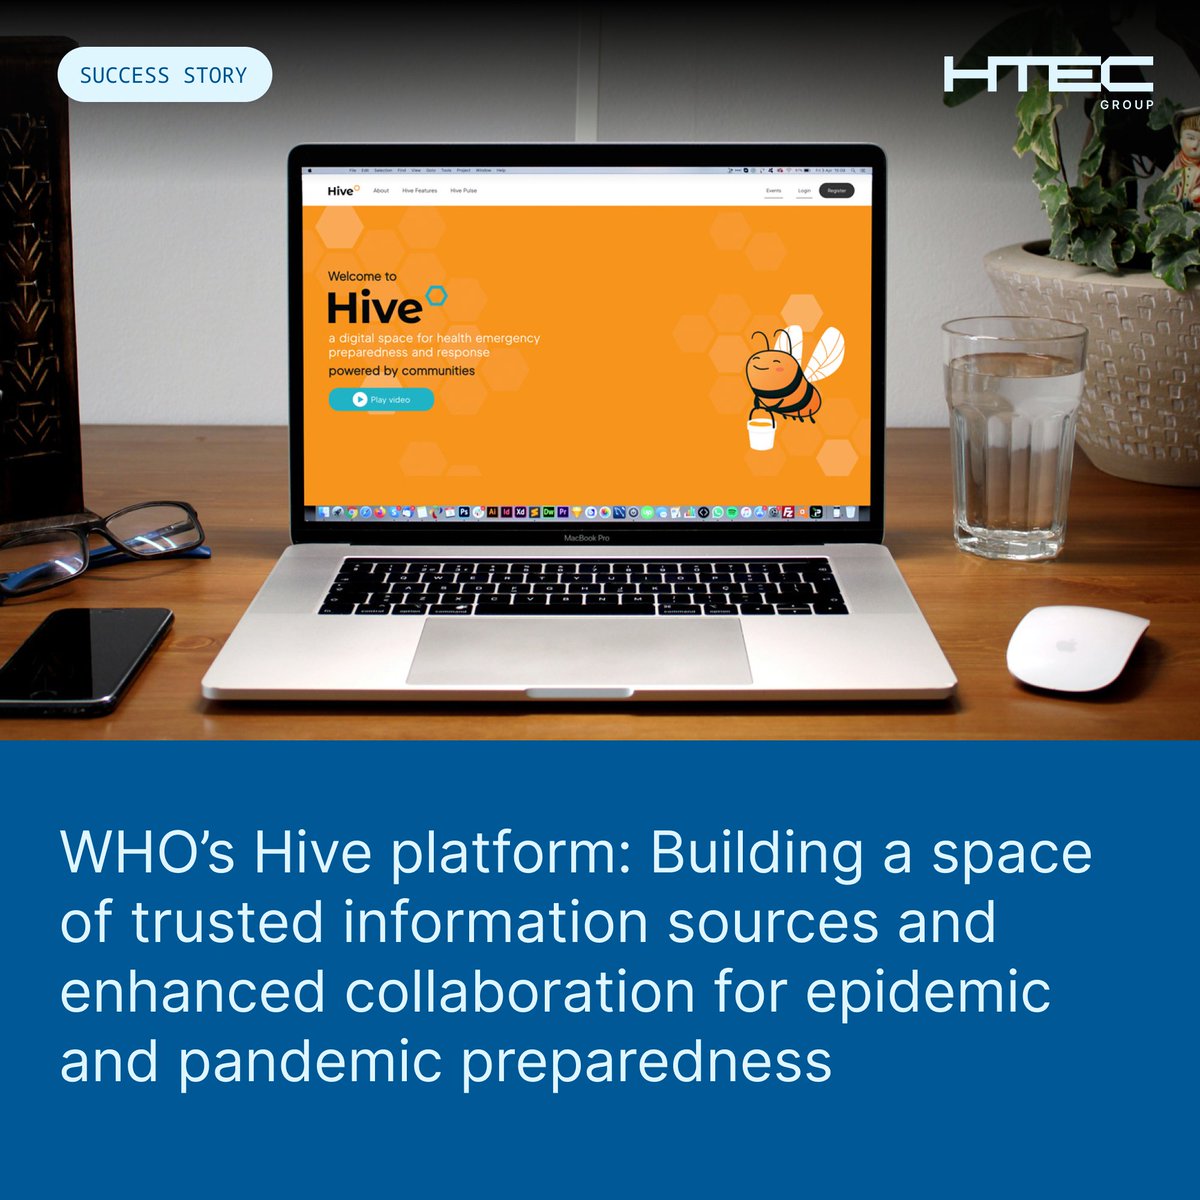 See how we helped the @WHO build the #Hive, a digital space for health emergency preparedness. 

Read the full success story: bit.ly/3rVJN6a

#HealthEmergency #DigitalSpace #CollaborationSpace #KnowledgeSharing #Platform #HTECGroup